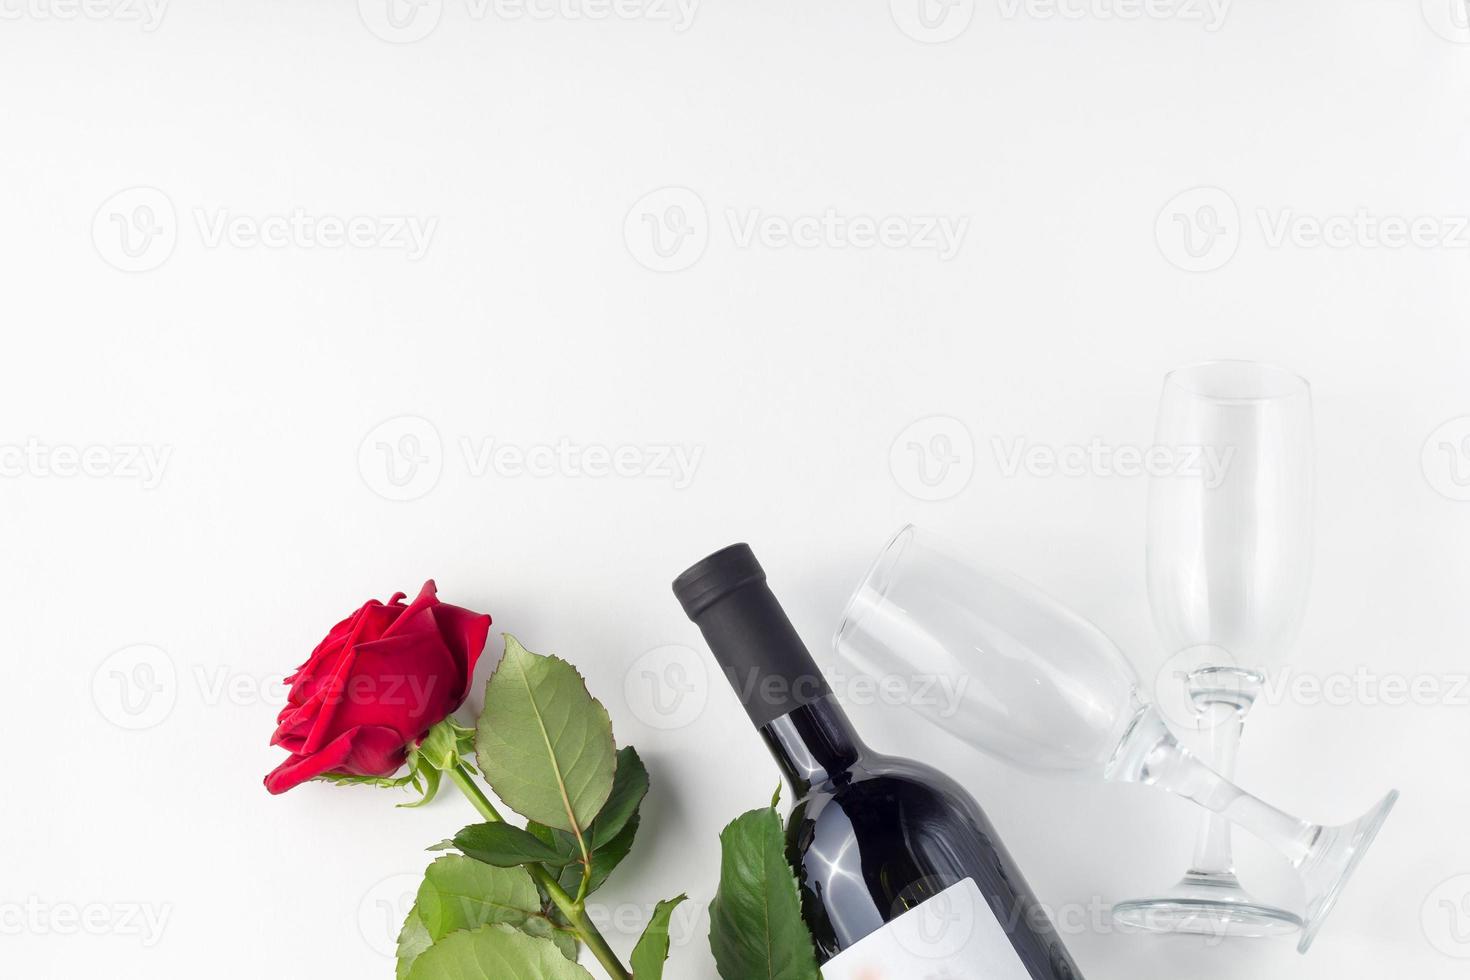 Bottle of wine, glass and red rose with petals on a white background photo